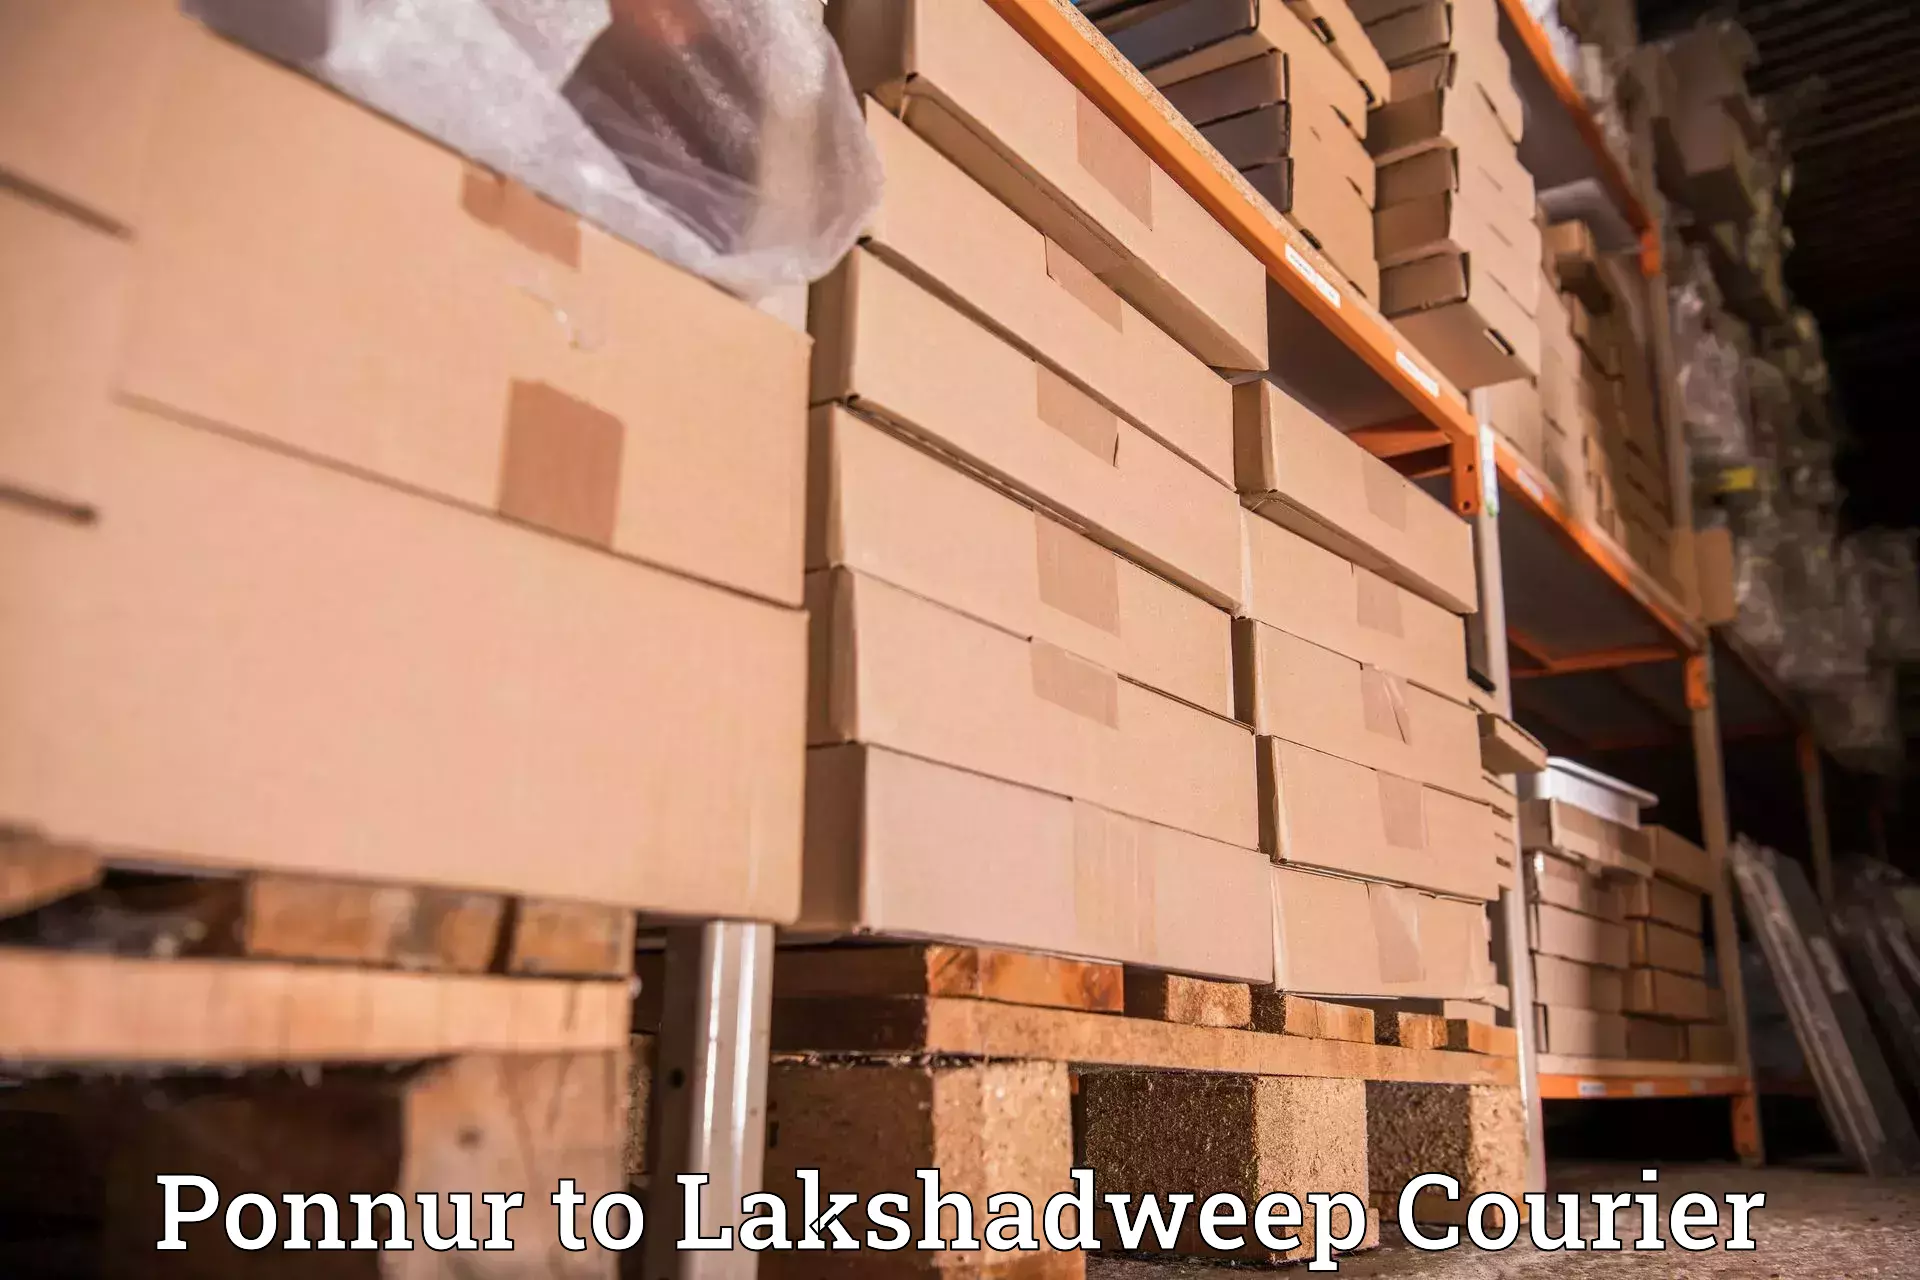 Courier services in Ponnur to Lakshadweep